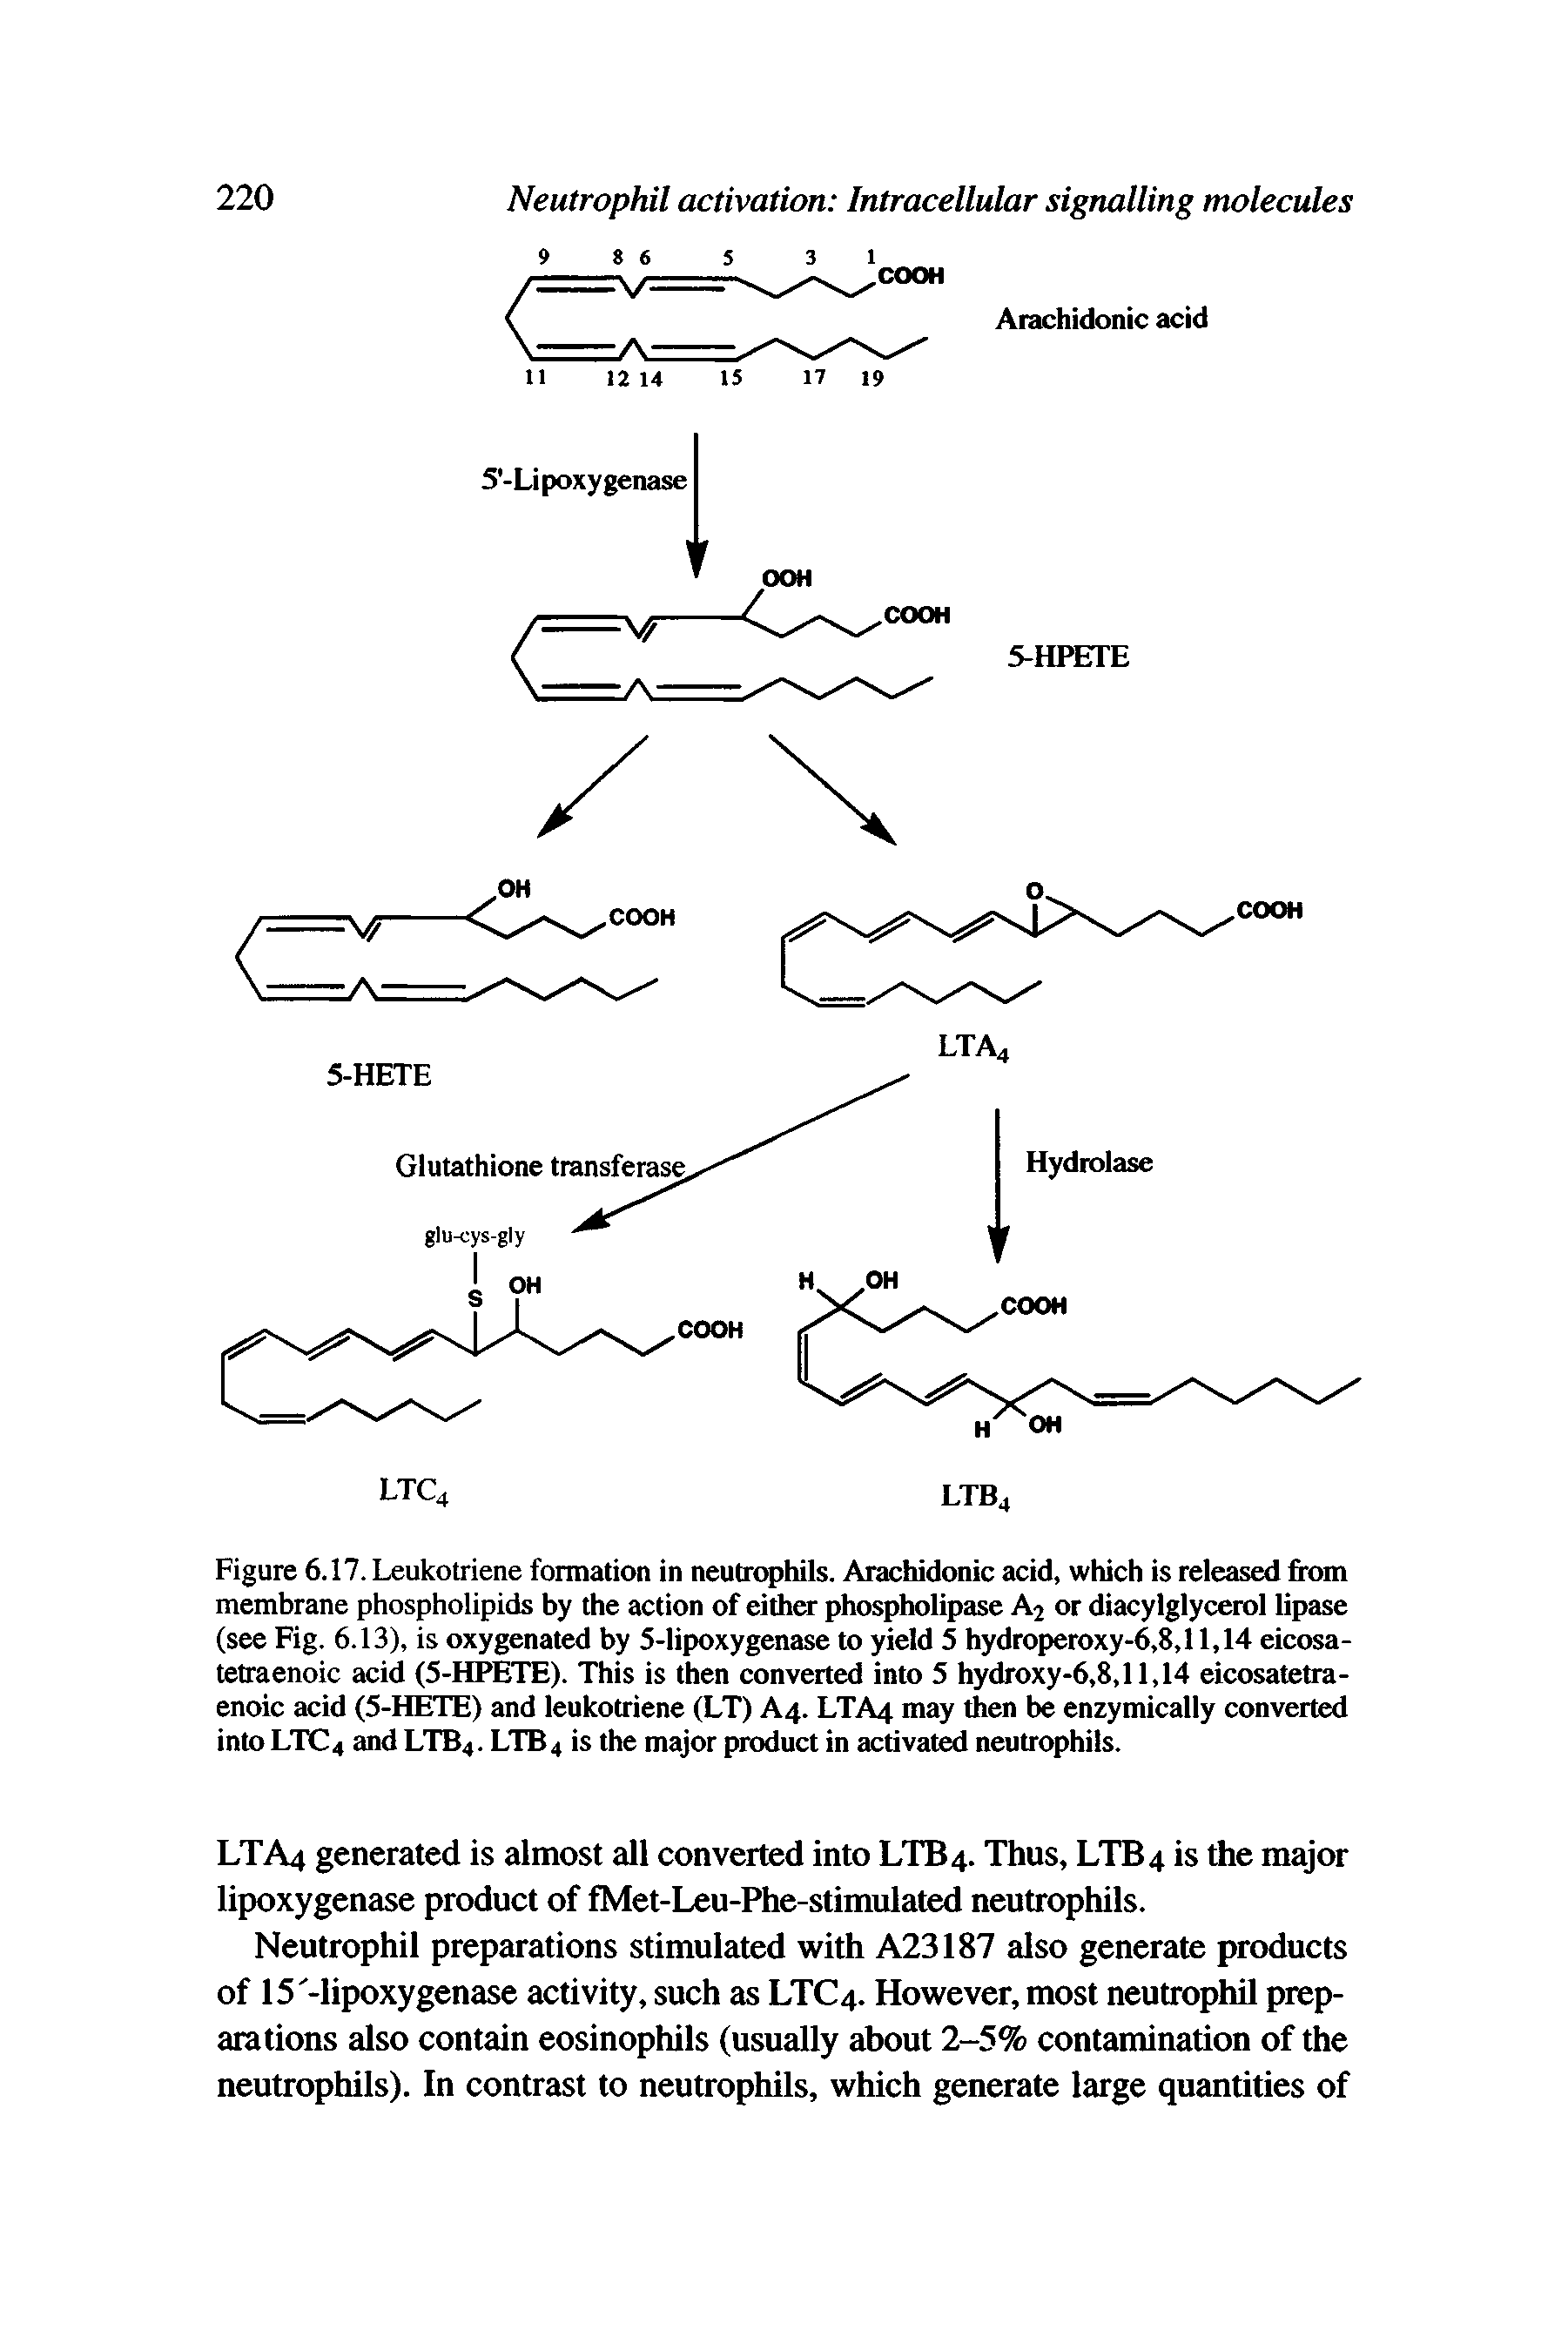 Figure 6.17. Leukotriene formation in neutrophils. Arachidonic acid, which is released from membrane phospholipids by the action of either phospholipase A2 or diacylglycerol lipase (see Fig. 6.13), is oxygenated by 5-lipoxygenase to yield 5 hydroperoxy-6,8,11,14 eicosa-tetraenoic acid (5-HPETE). This is then converted into 5 hydroxy-6,8,11,14 eicosatetra-enoic acid (5-HETE) and leukotriene (LT) A4. LTA4 may then be enzymically converted into LTC4 and LTB4. LTB4 is the major product in activated neutrophils.